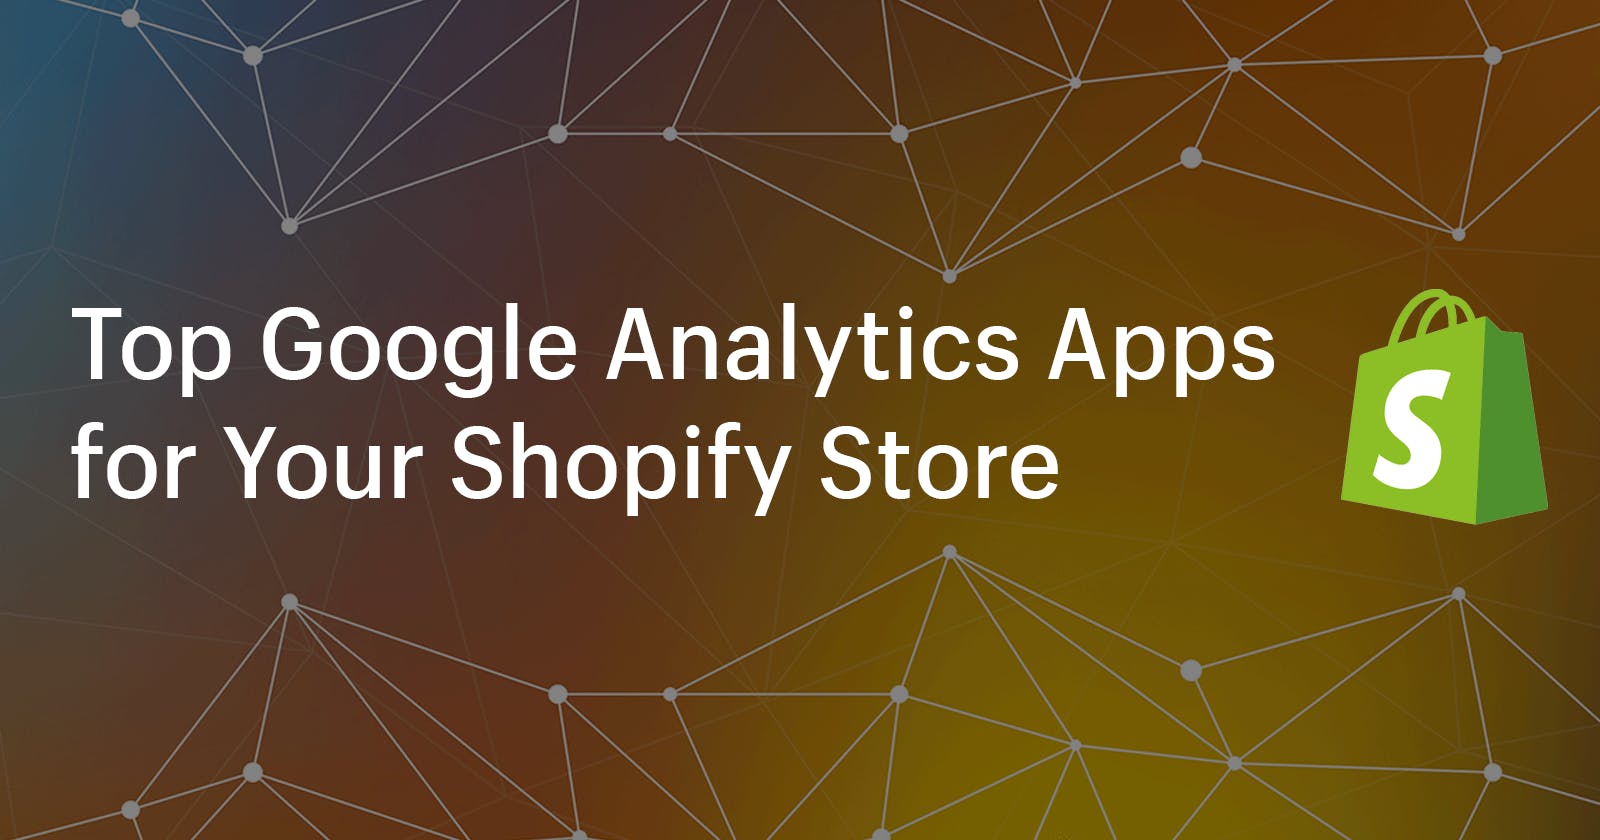 Top Google Analytics Apps for Your Shopify Store